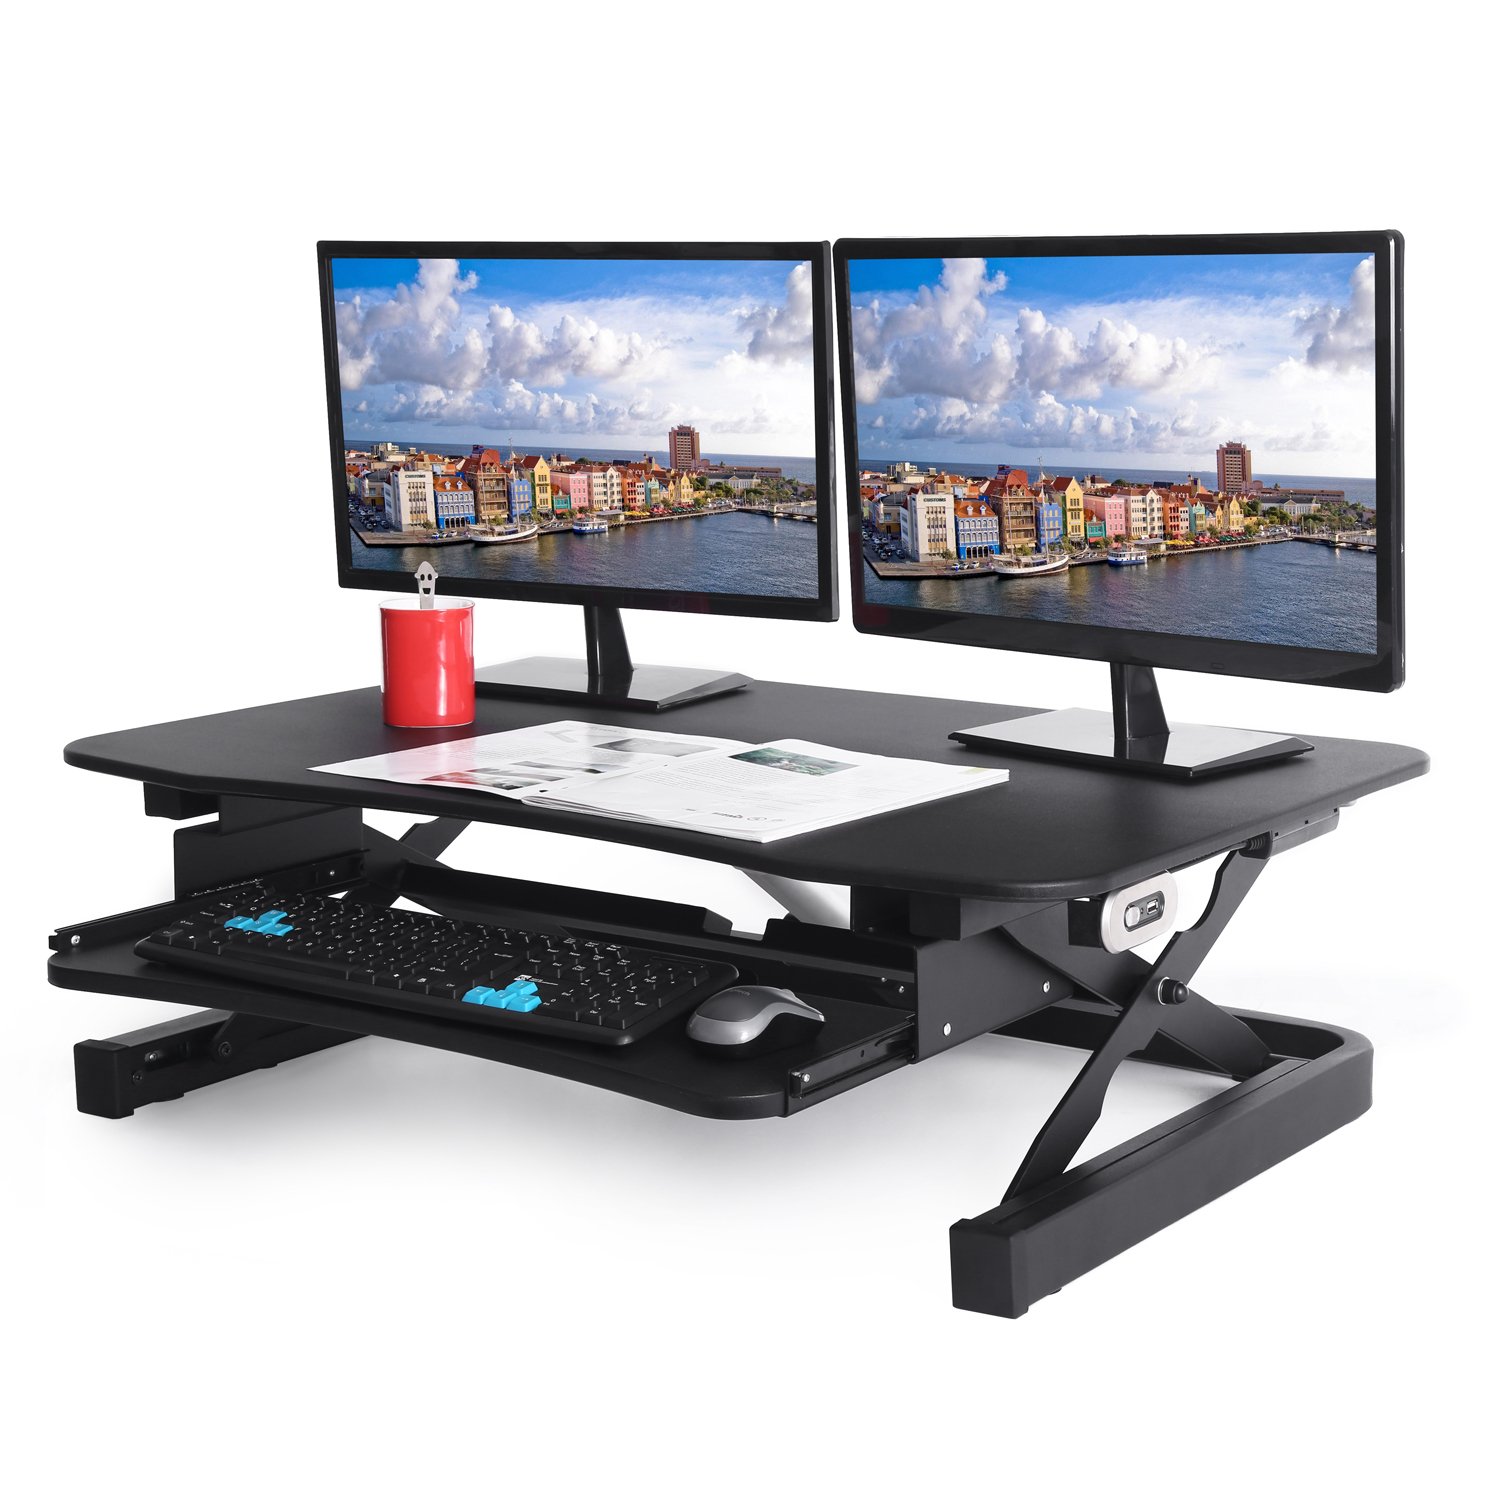 ApexDesk EDR-3612-BLACK ZT Series Height Adjustable Sit to Stand Electric Desk Converter, 2-Tier Design with Large 36x24" Upper Work Surface an...